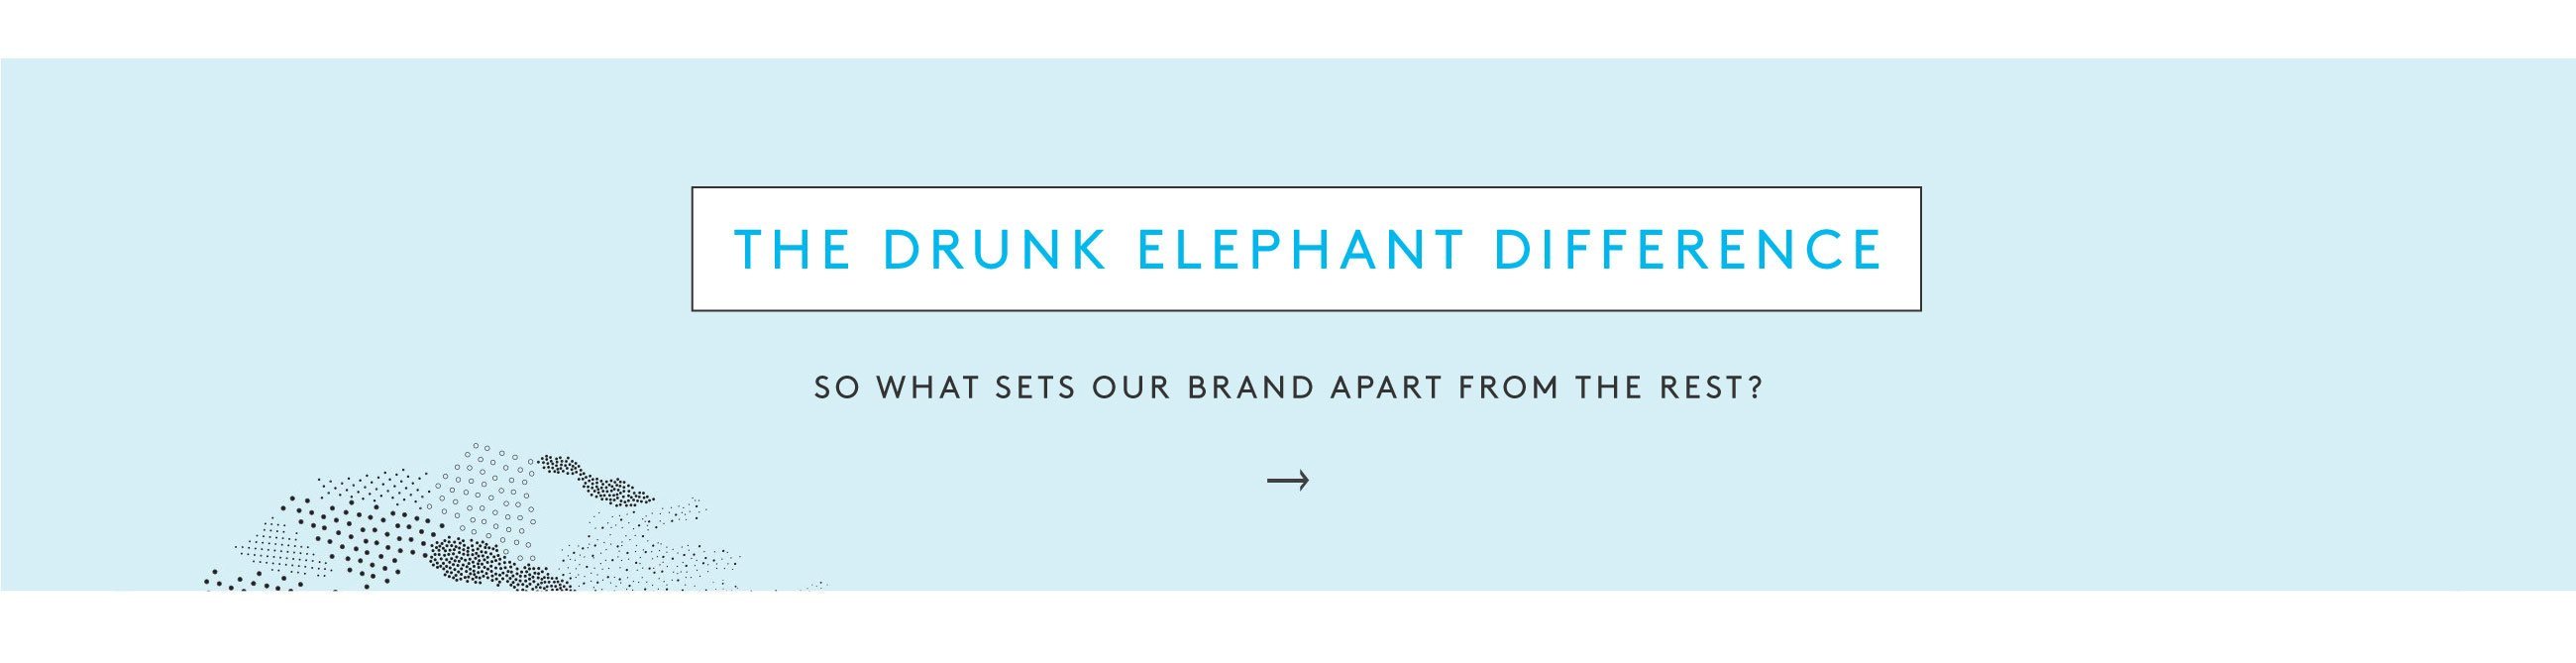 The Drunk Elephant Difference - See what sets us apart from the rest.